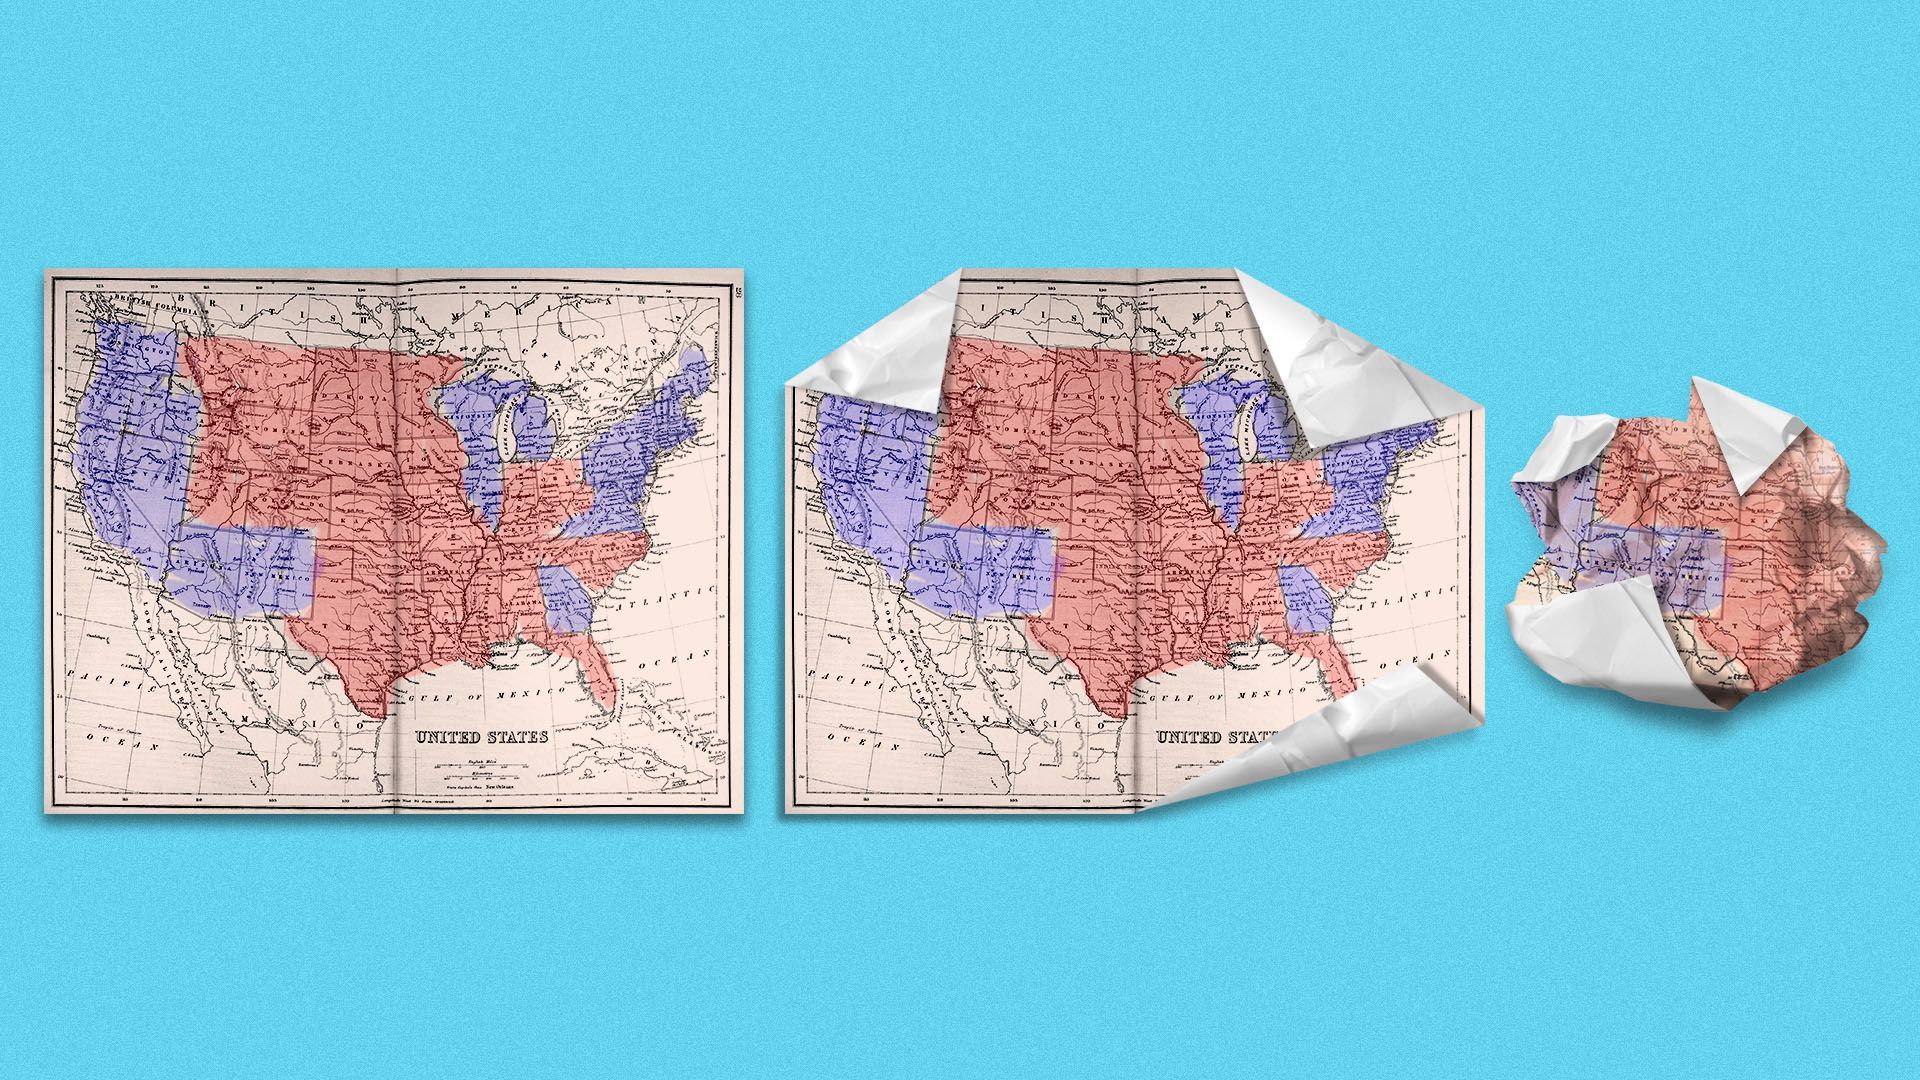 Illustration of a map of the United States in red and blue being crumpled into a ball